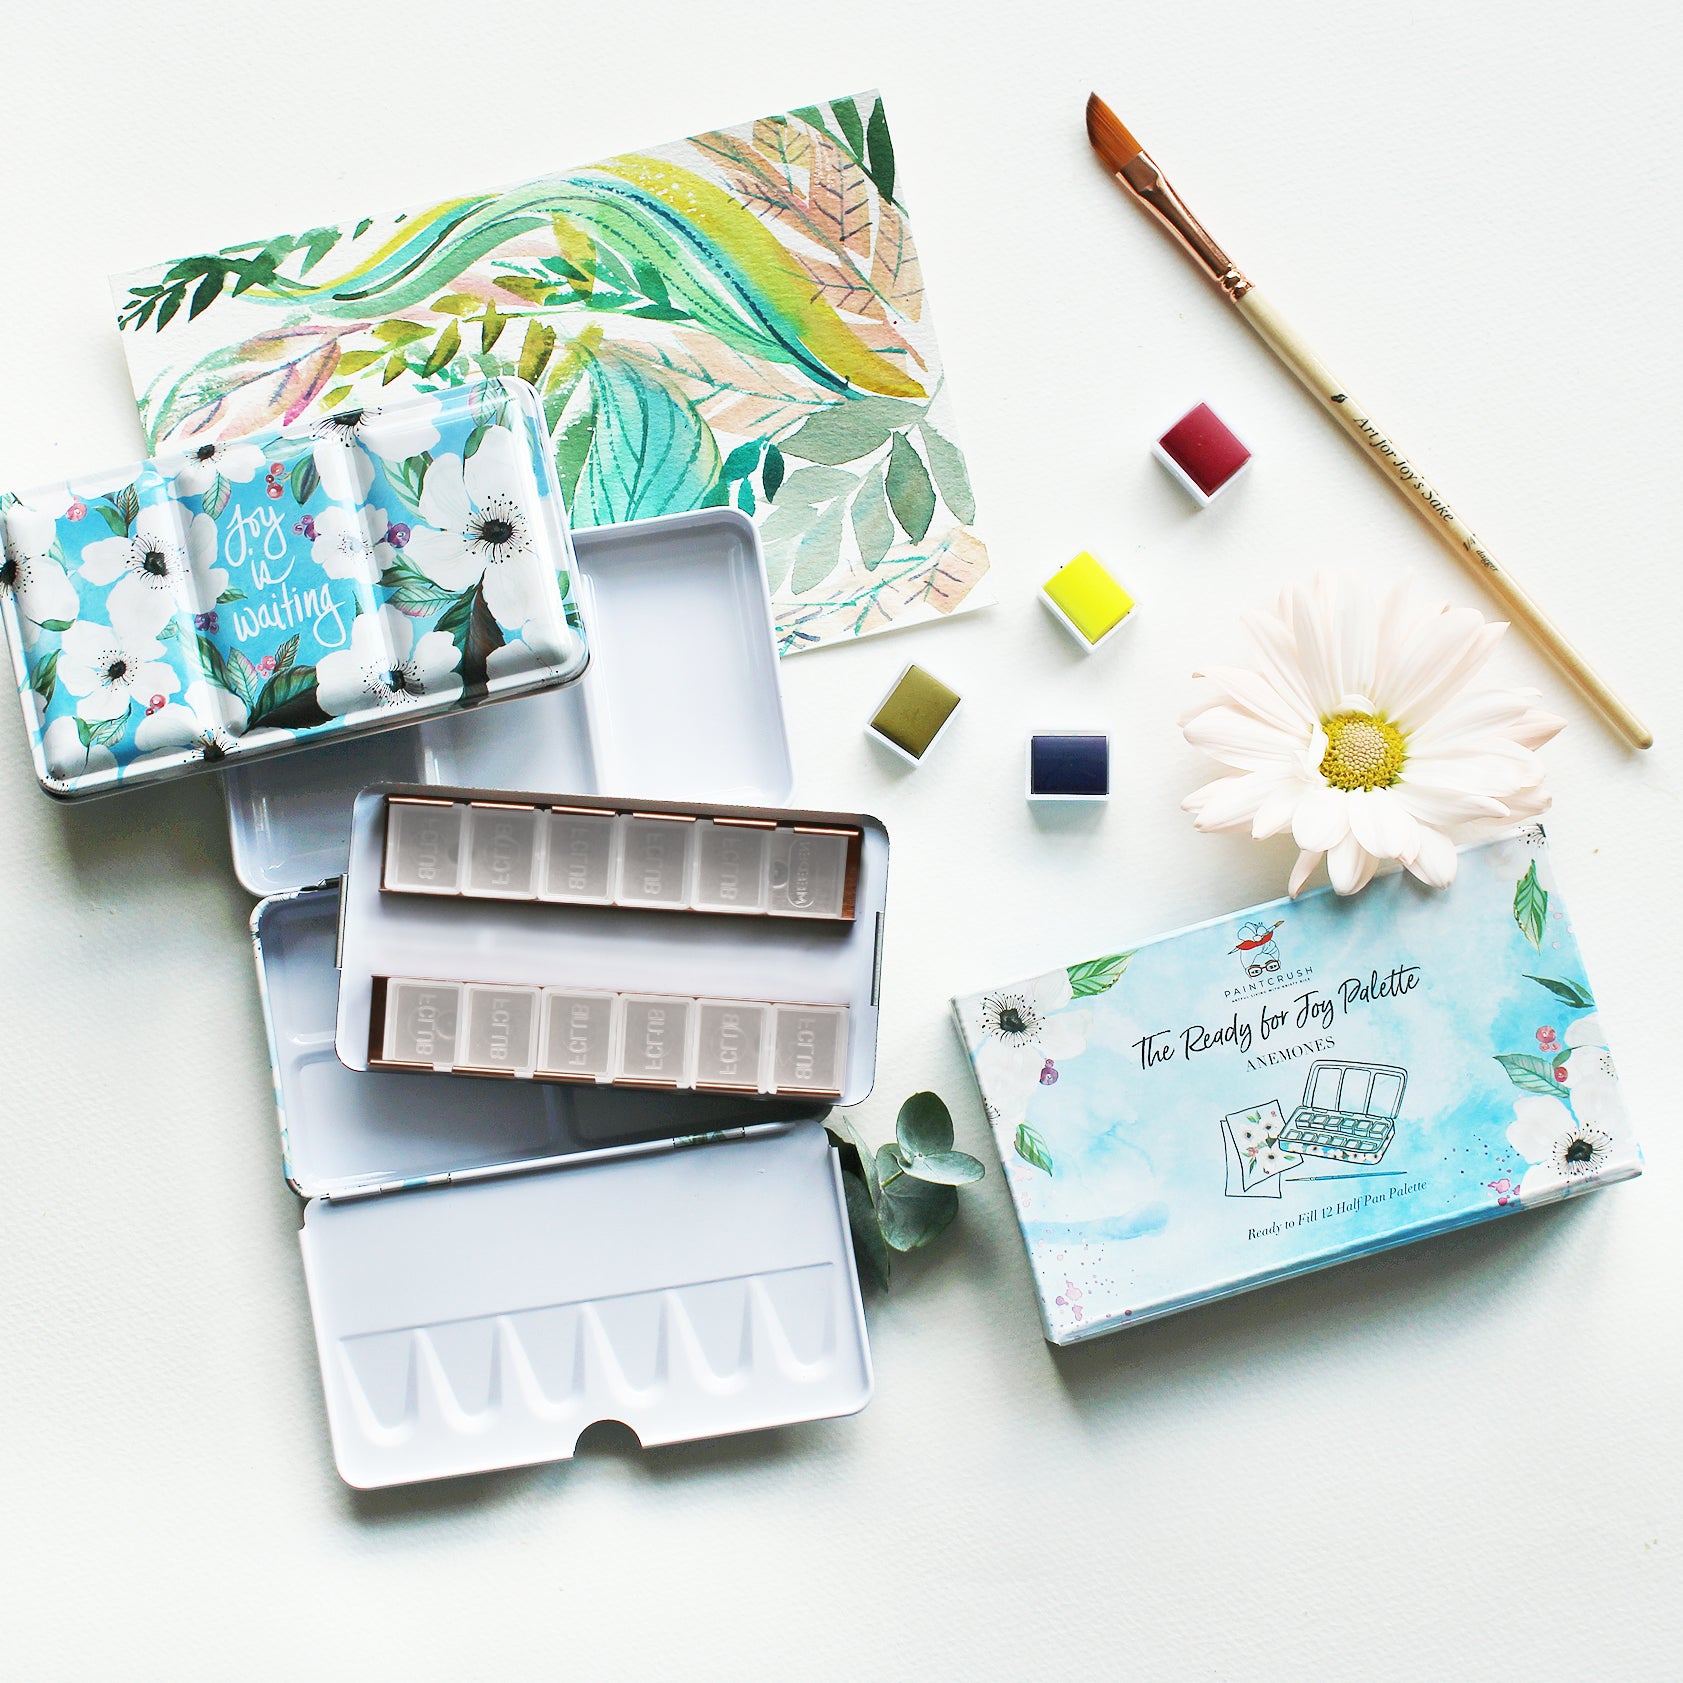 The #artforjoysake Watercolor Brush - Unique Shopping for Artistic Gifts